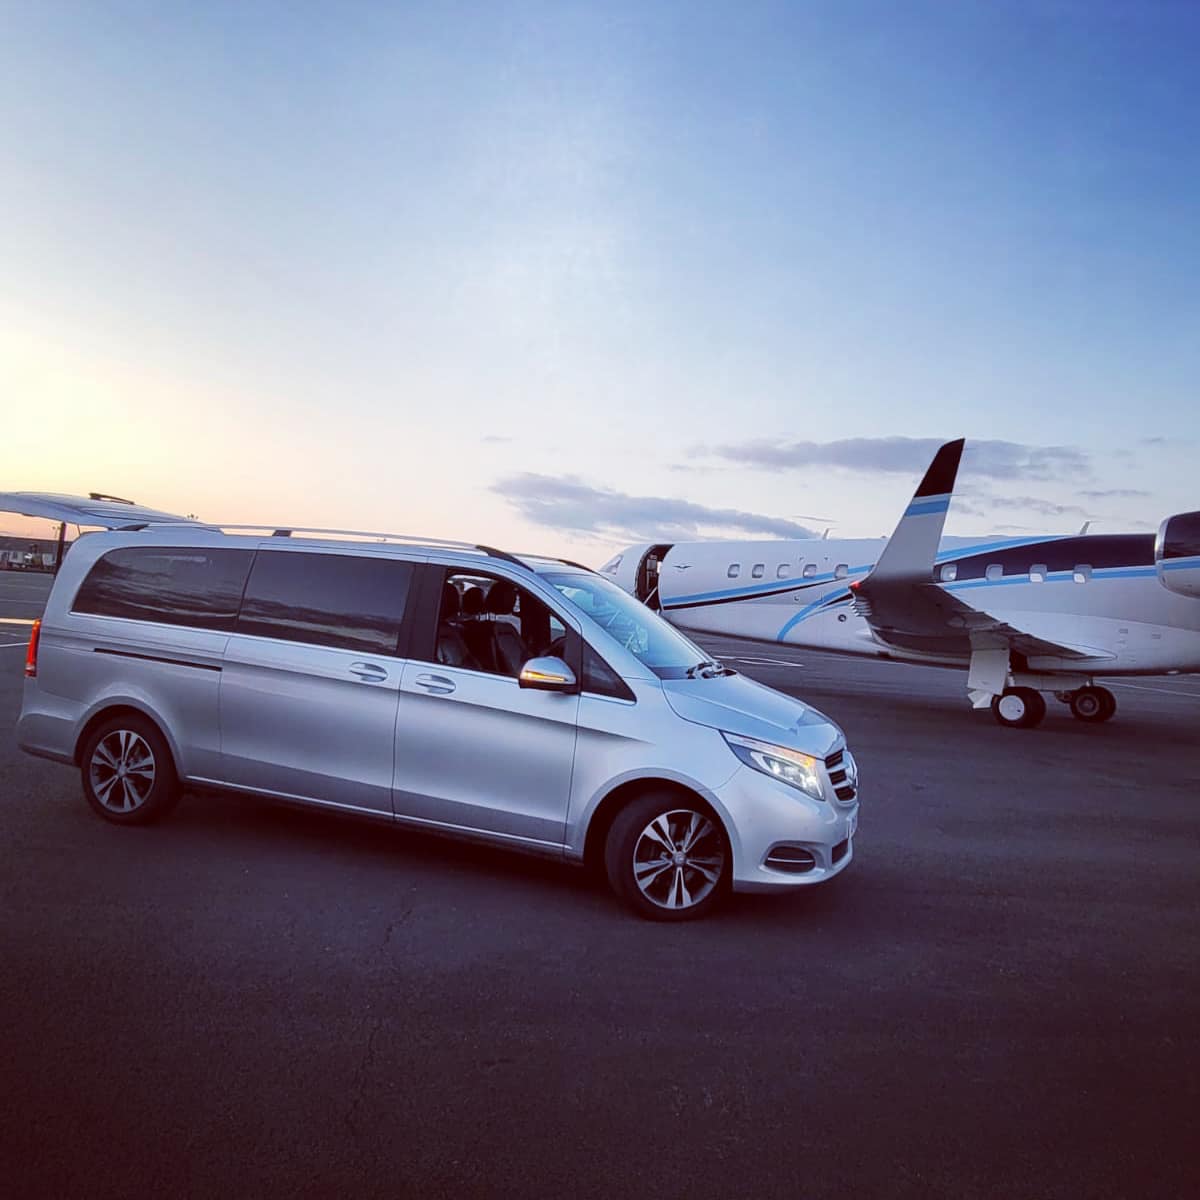 V Class on VIP transfer at Dundee Airport